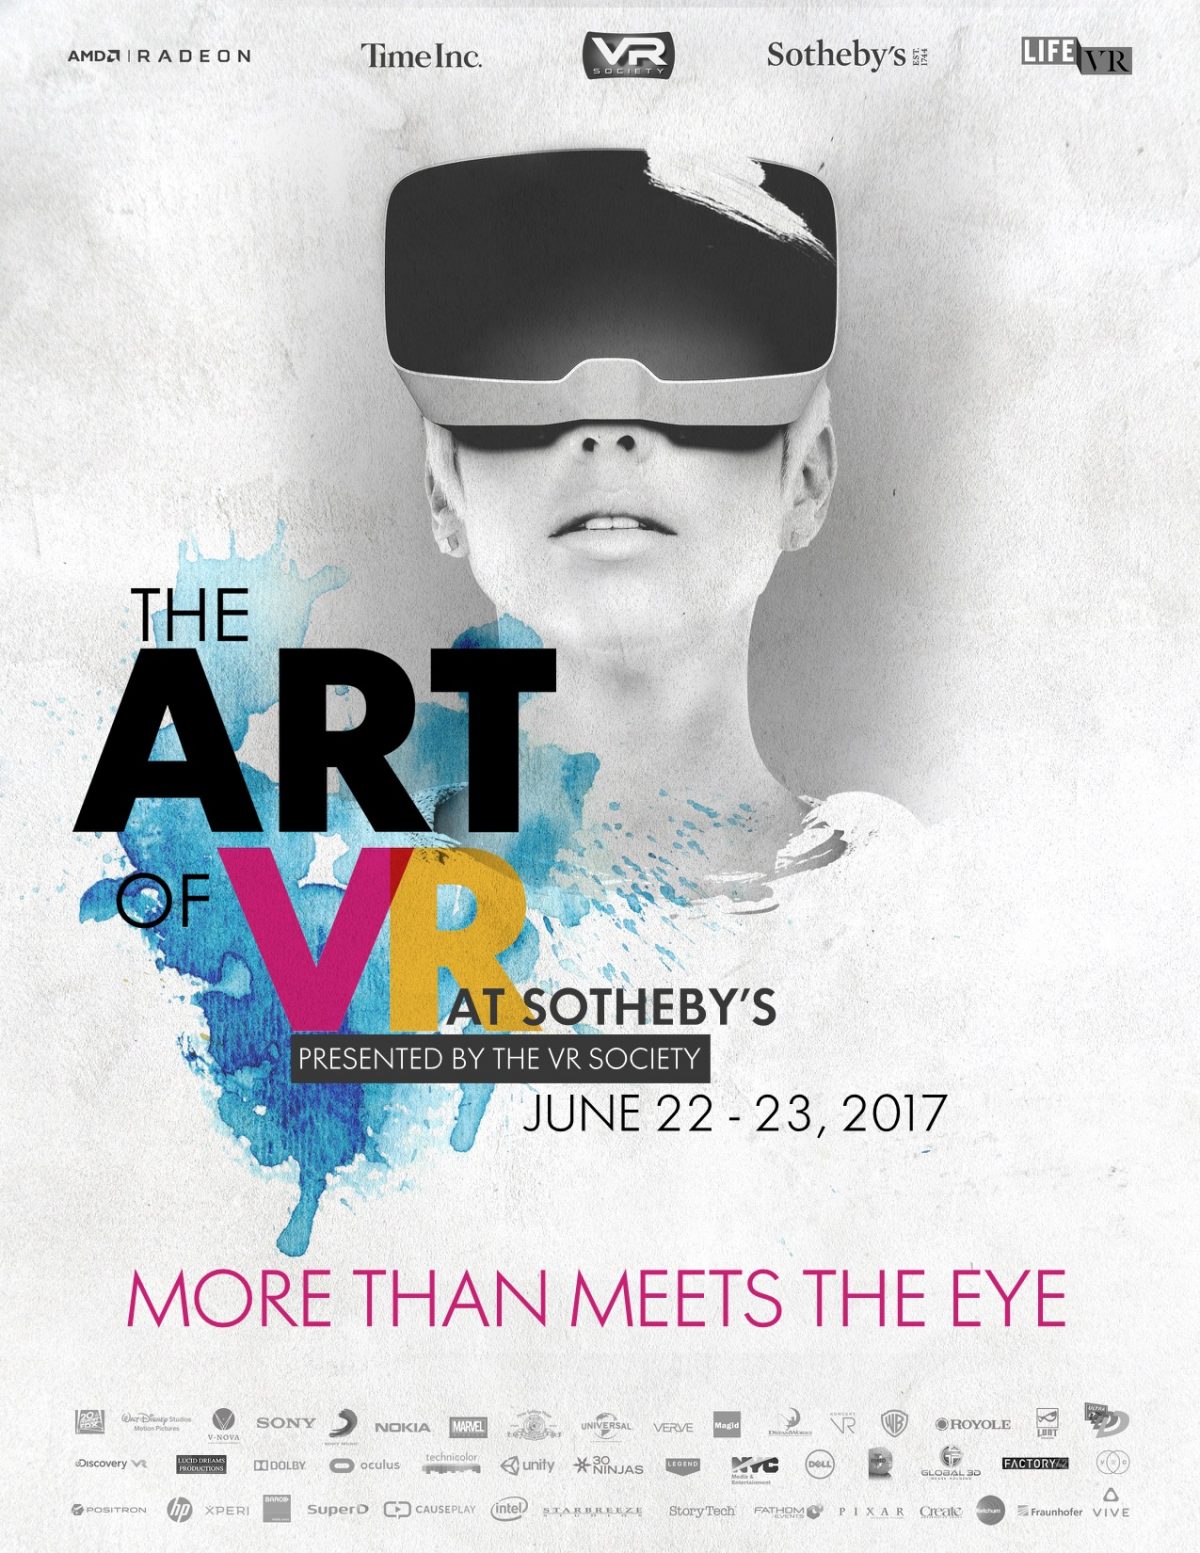 Event: The Art of VR at Sotheby’s